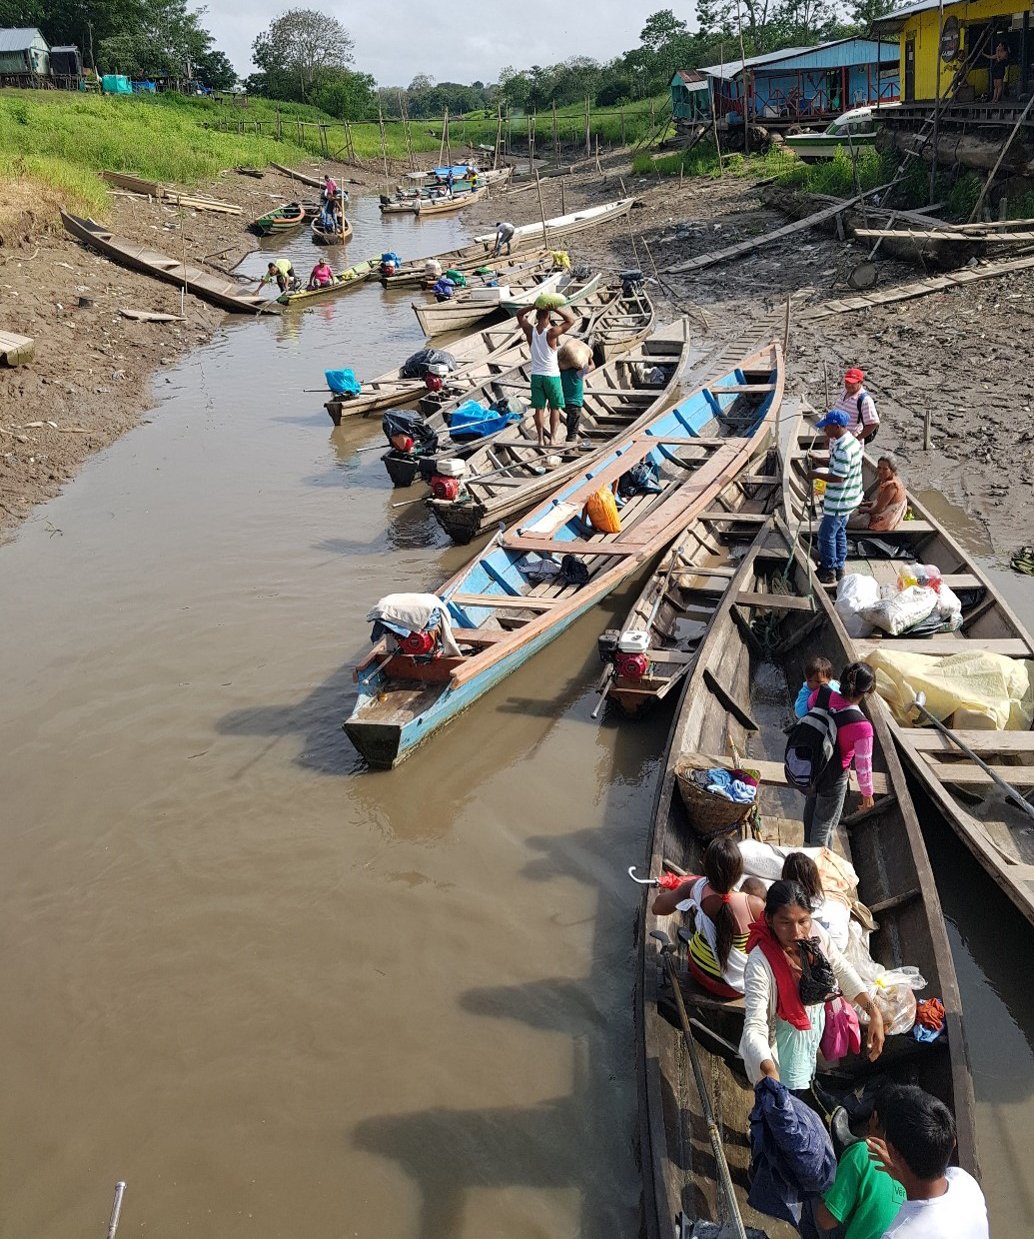 People on the Amazon River